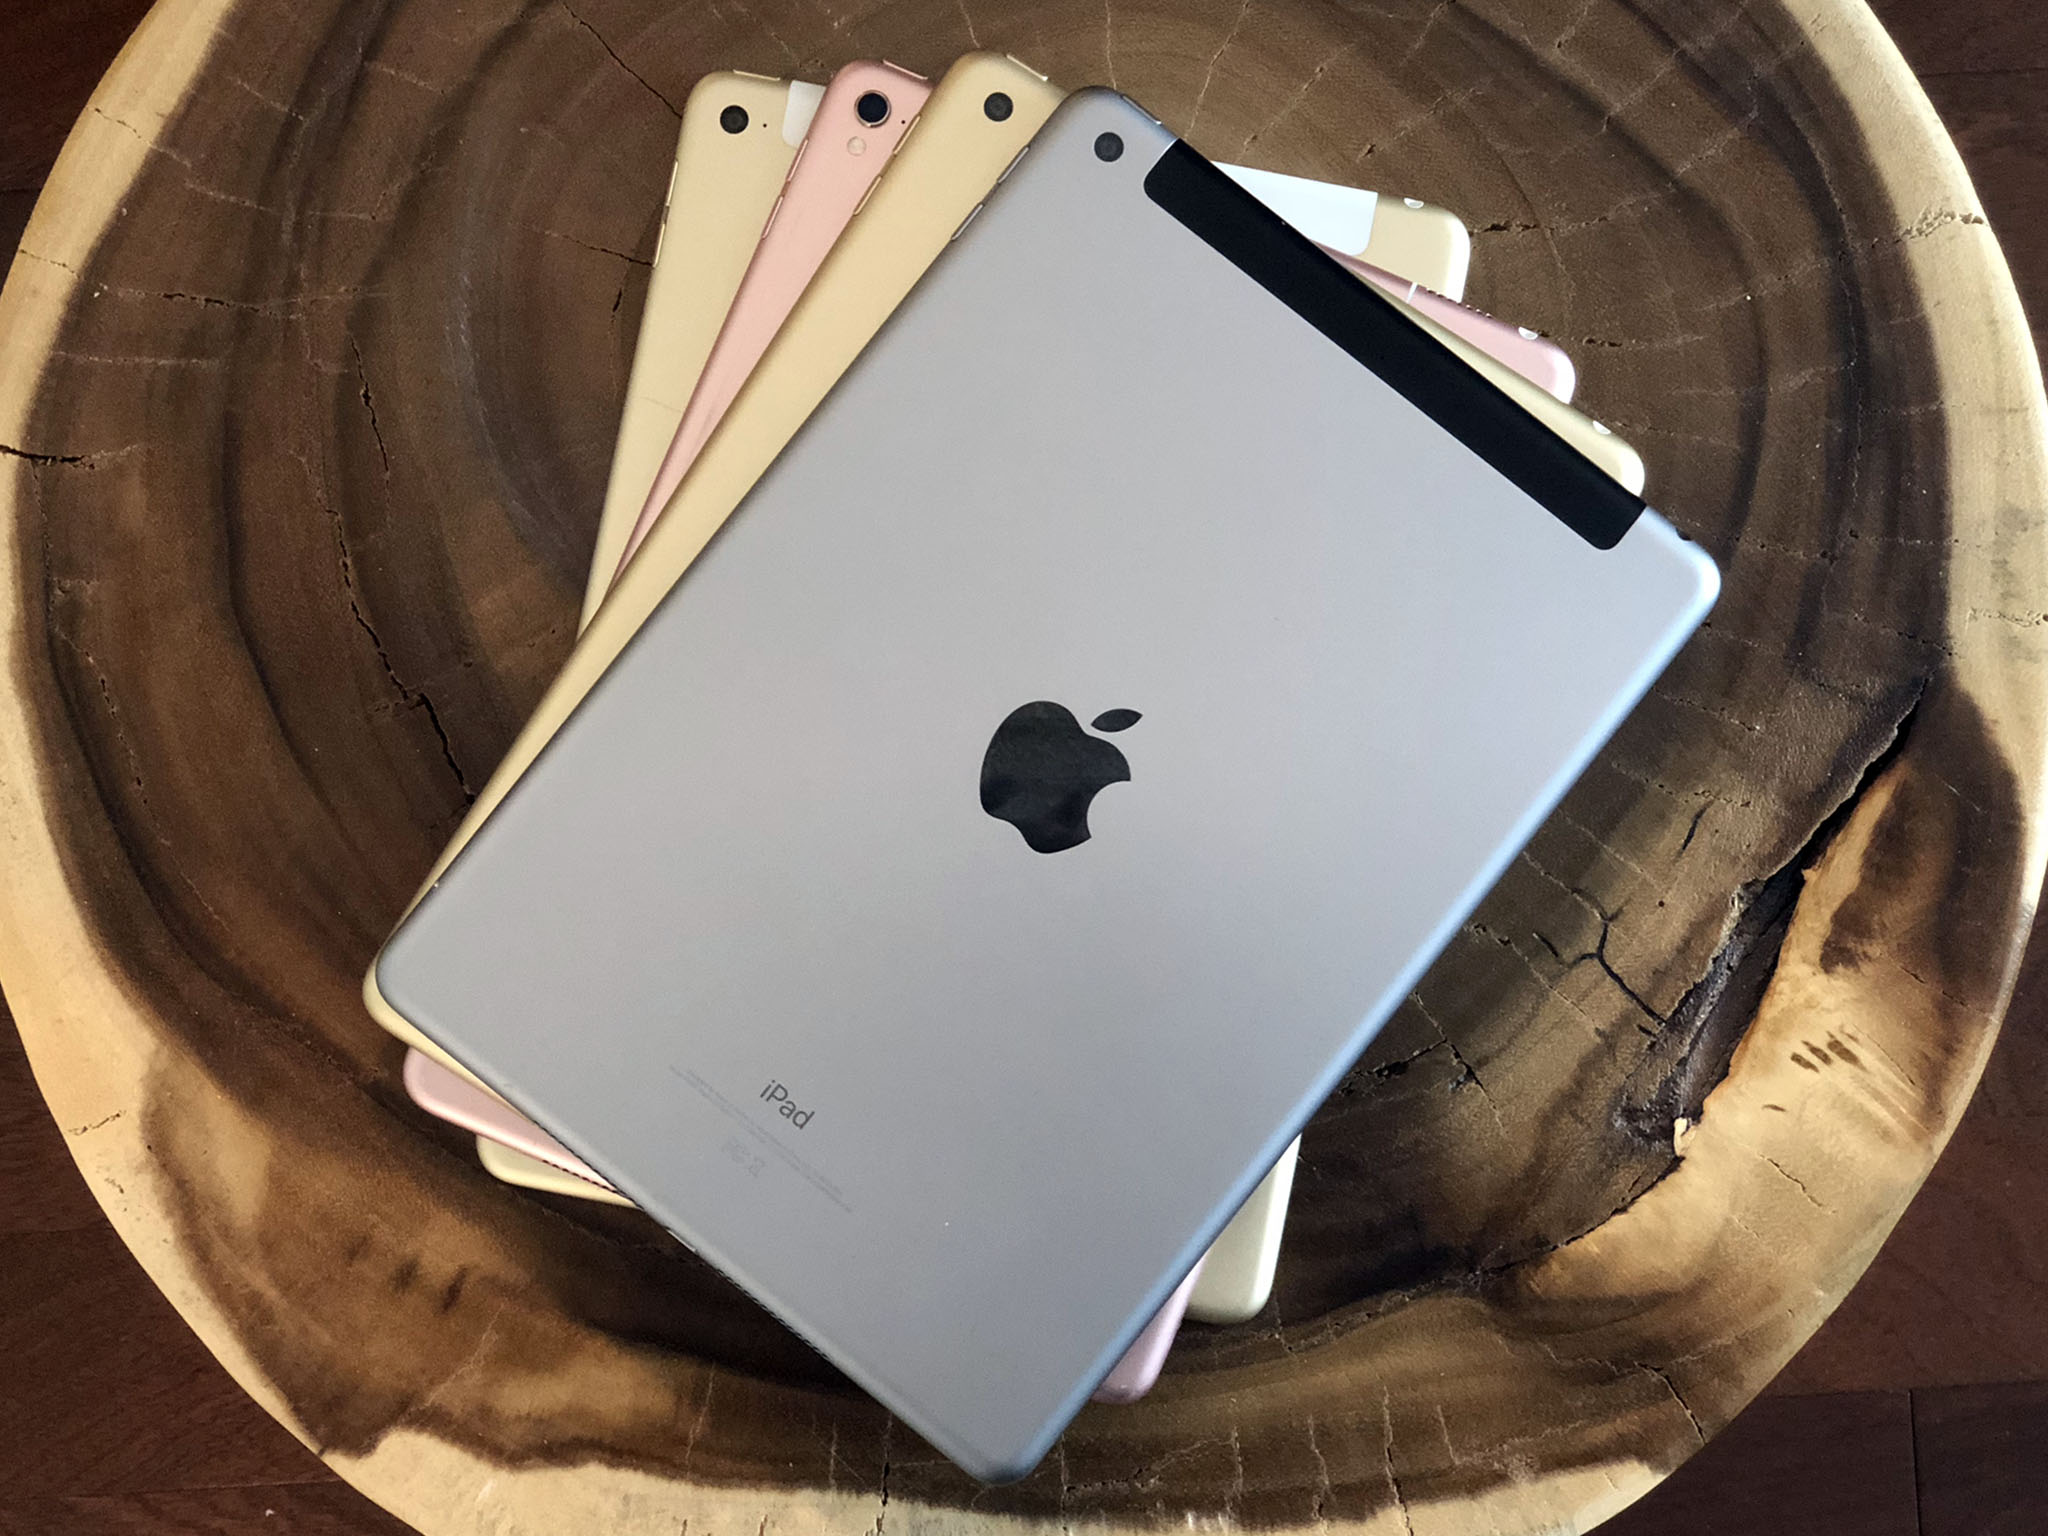 Review: 6th-Gen iPad (2018) - iPad Pro on a Budget